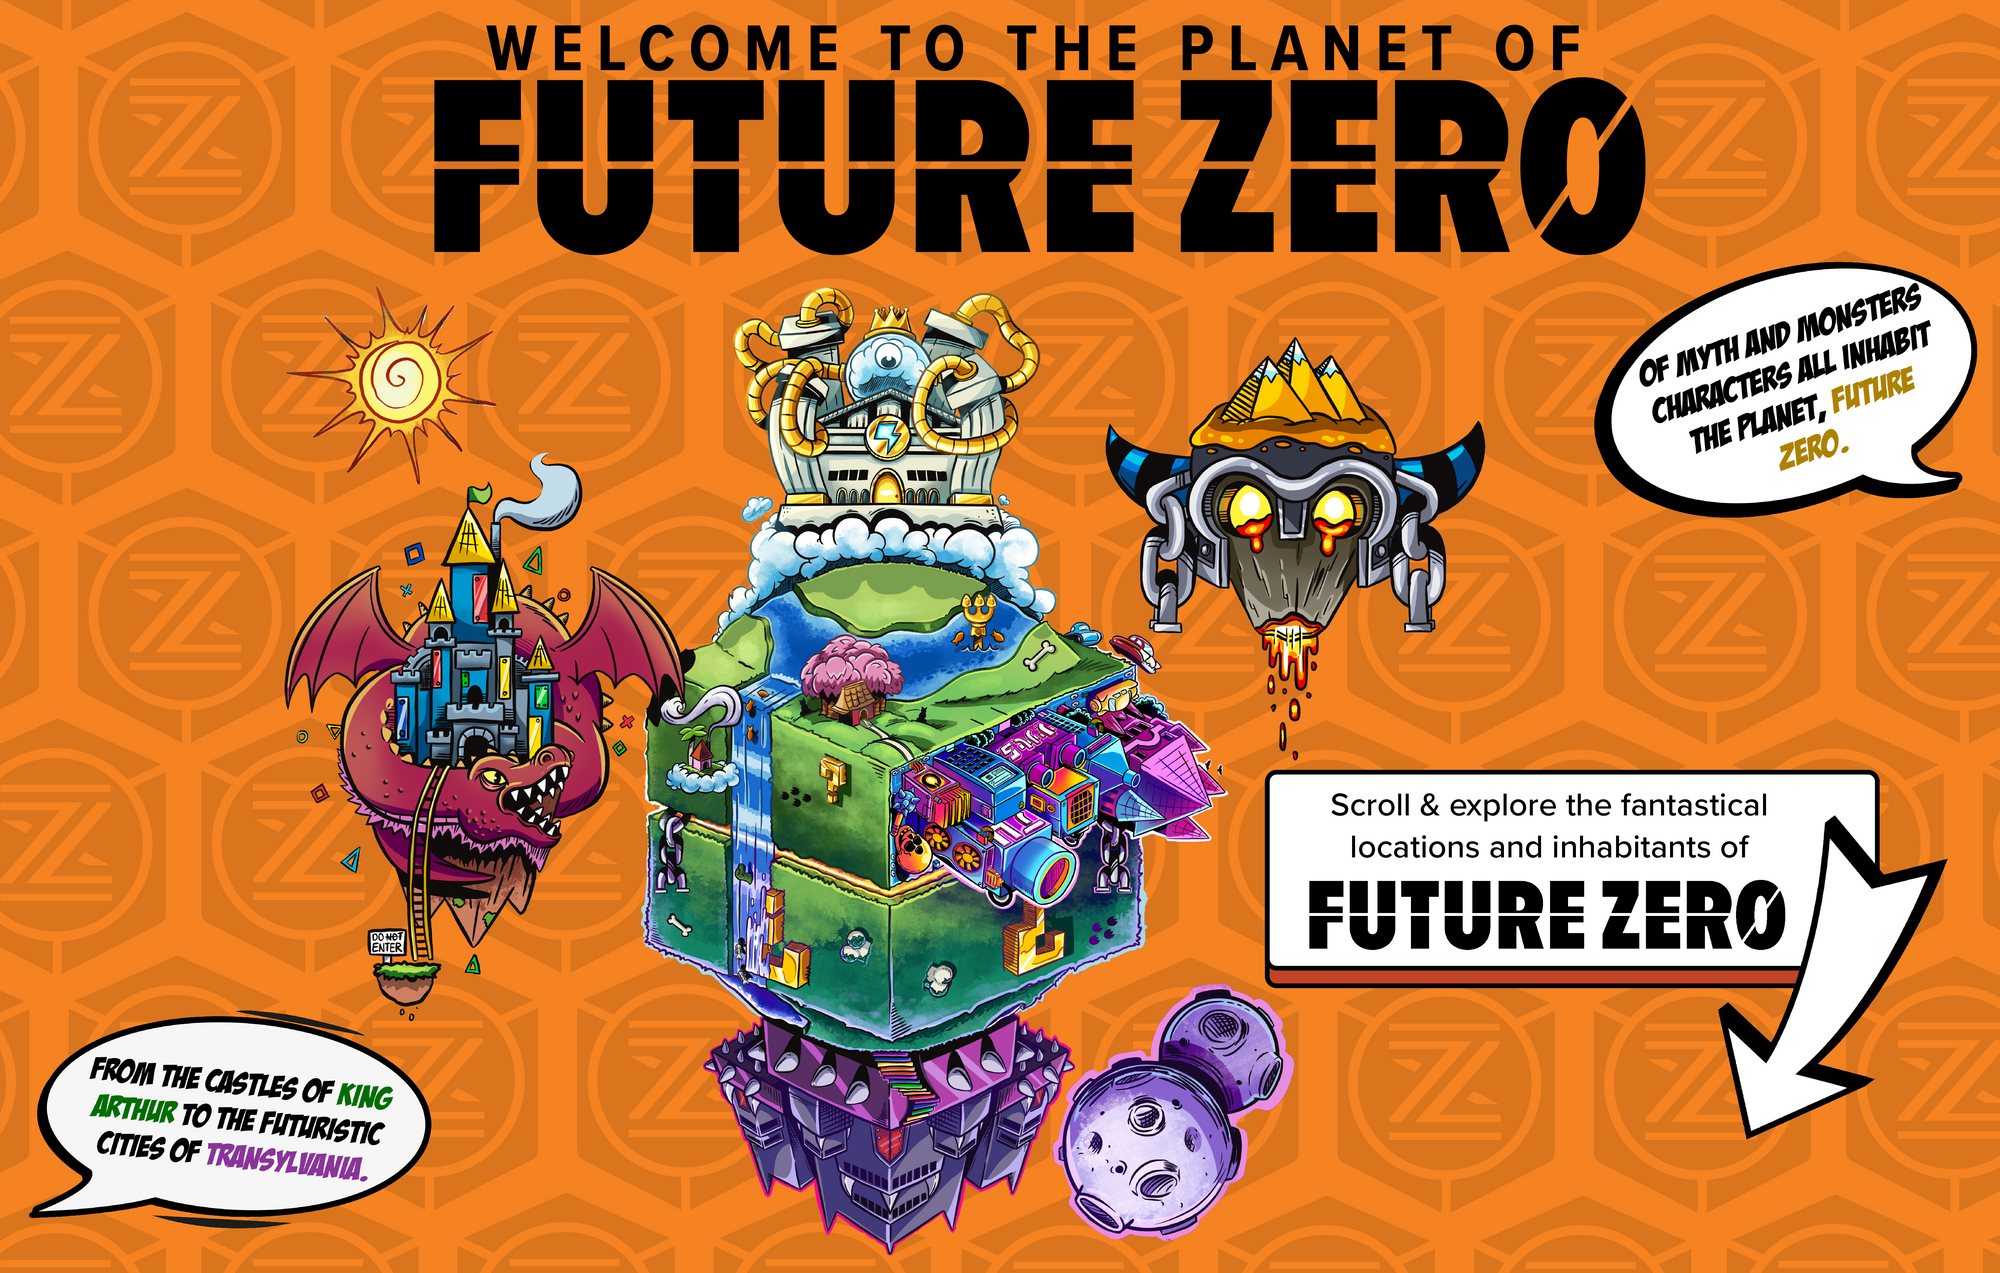 Planet Future Zero illustration with text describing the planet and text "Scroll & Explore the fantastical locations and inhabitants of Future Zero" on orangeFuture Zero logo pattern